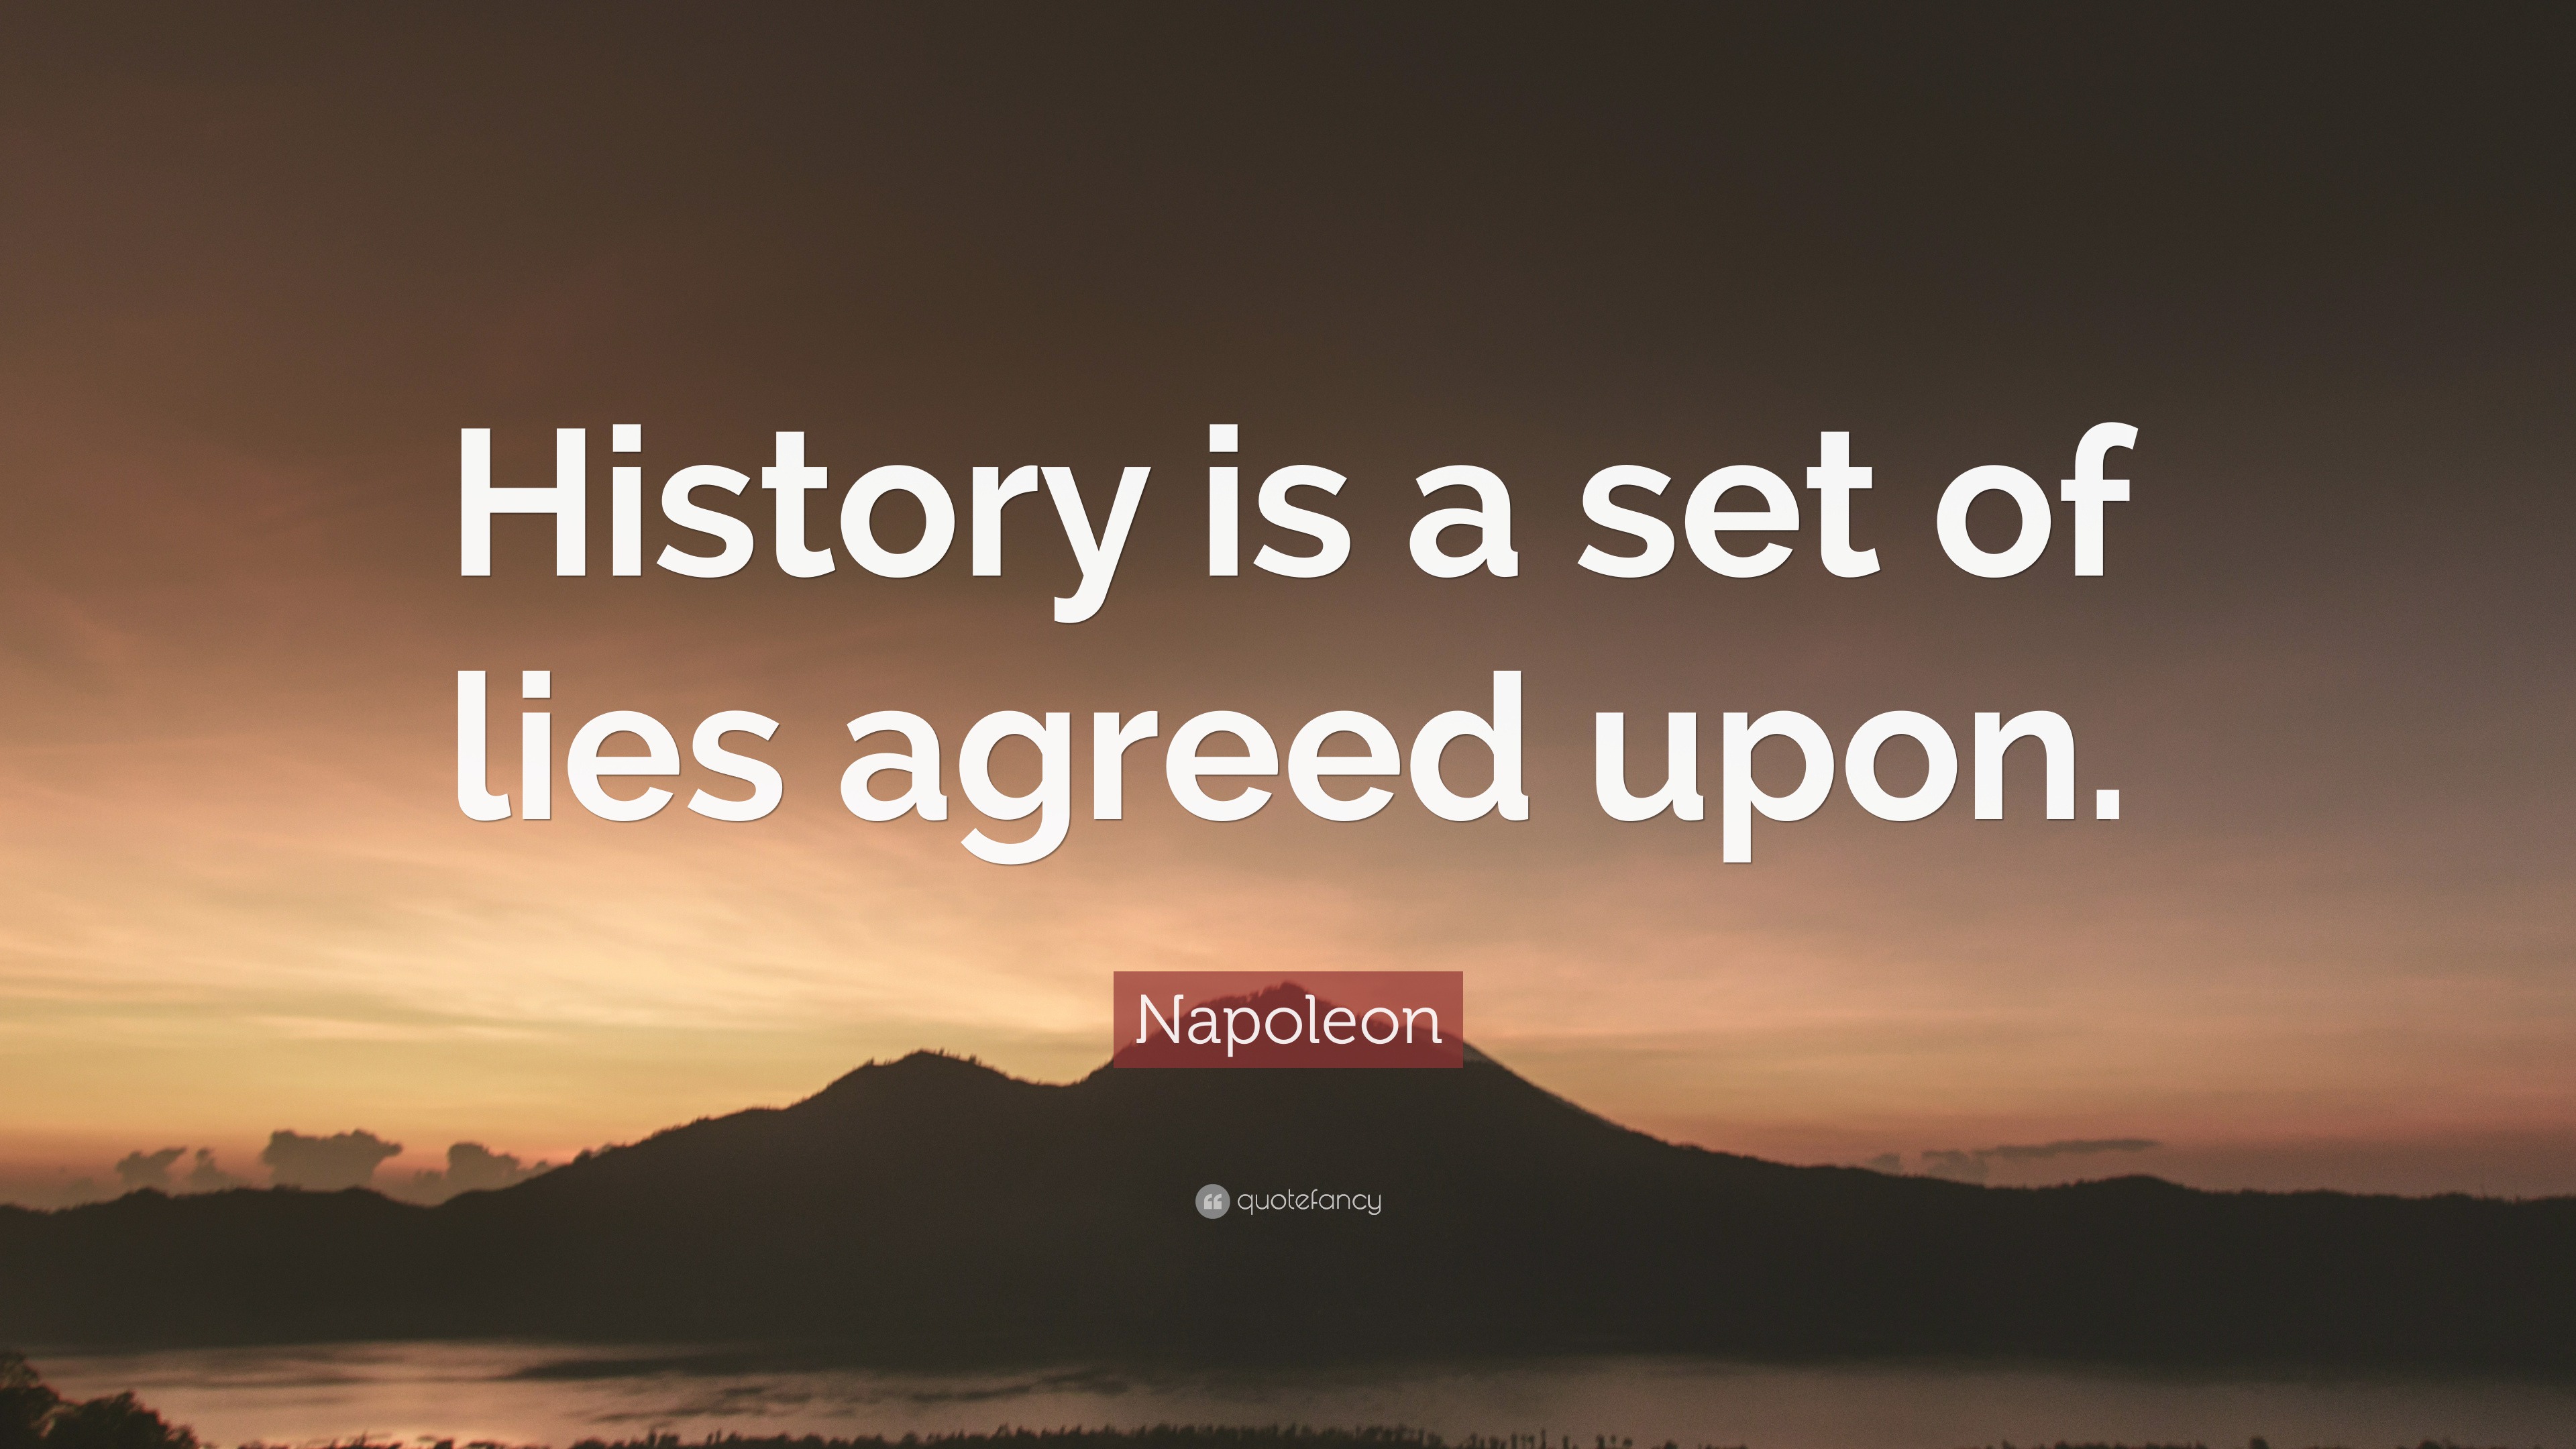 Napoleon Quote: “History is a set of lies agreed upon.”